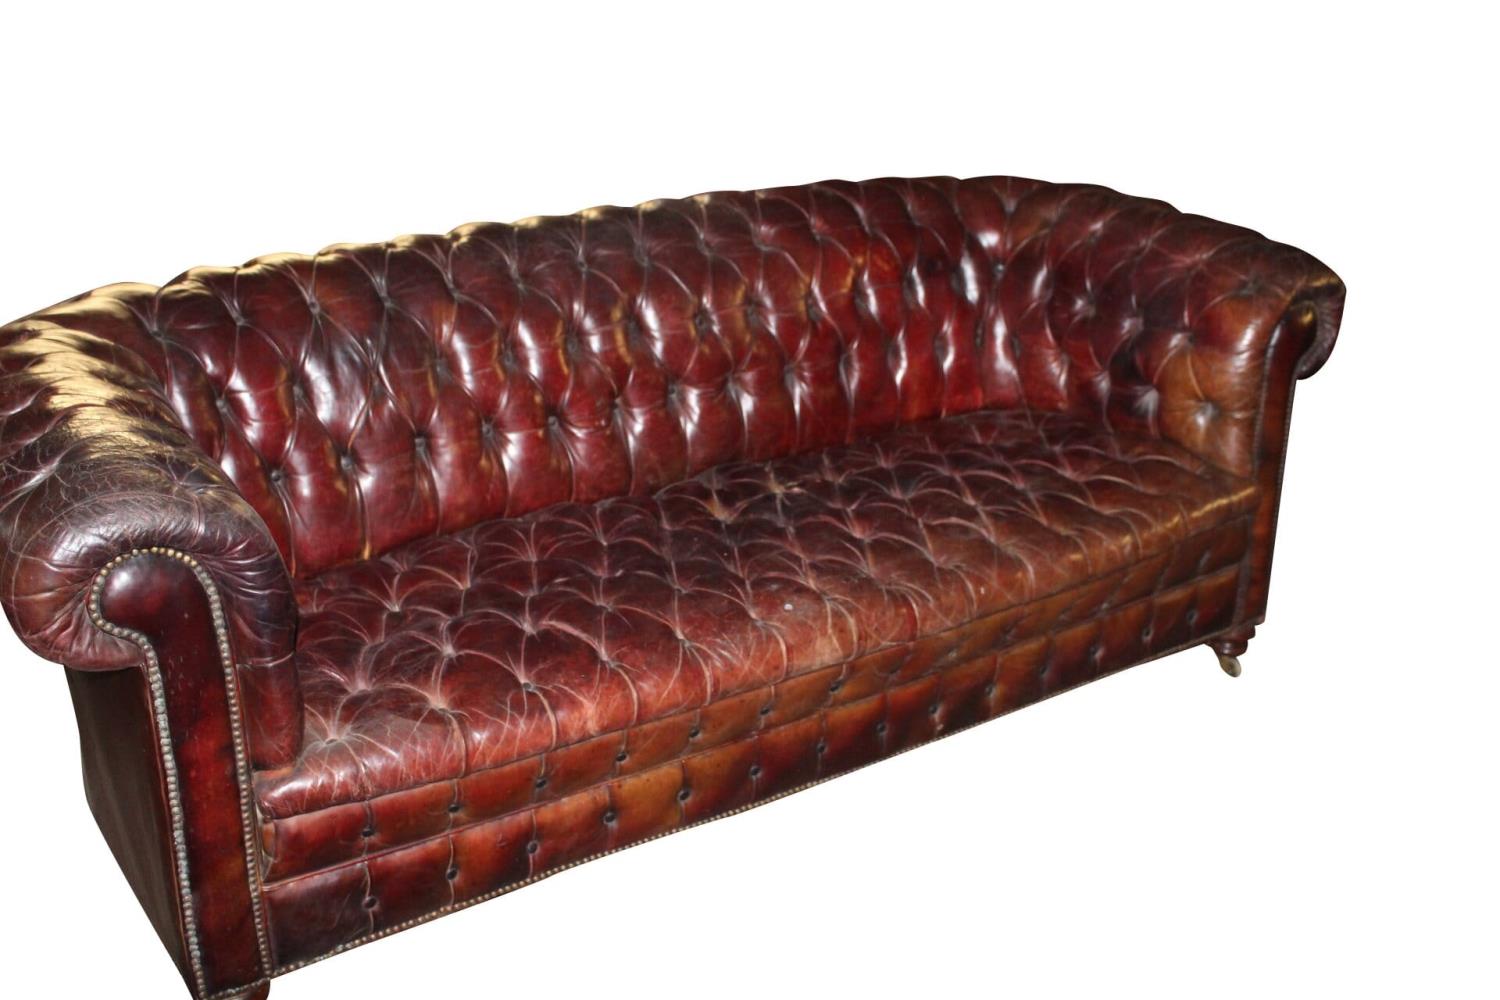 Early 20th C. deep buttoned leather chesterfield sofa.